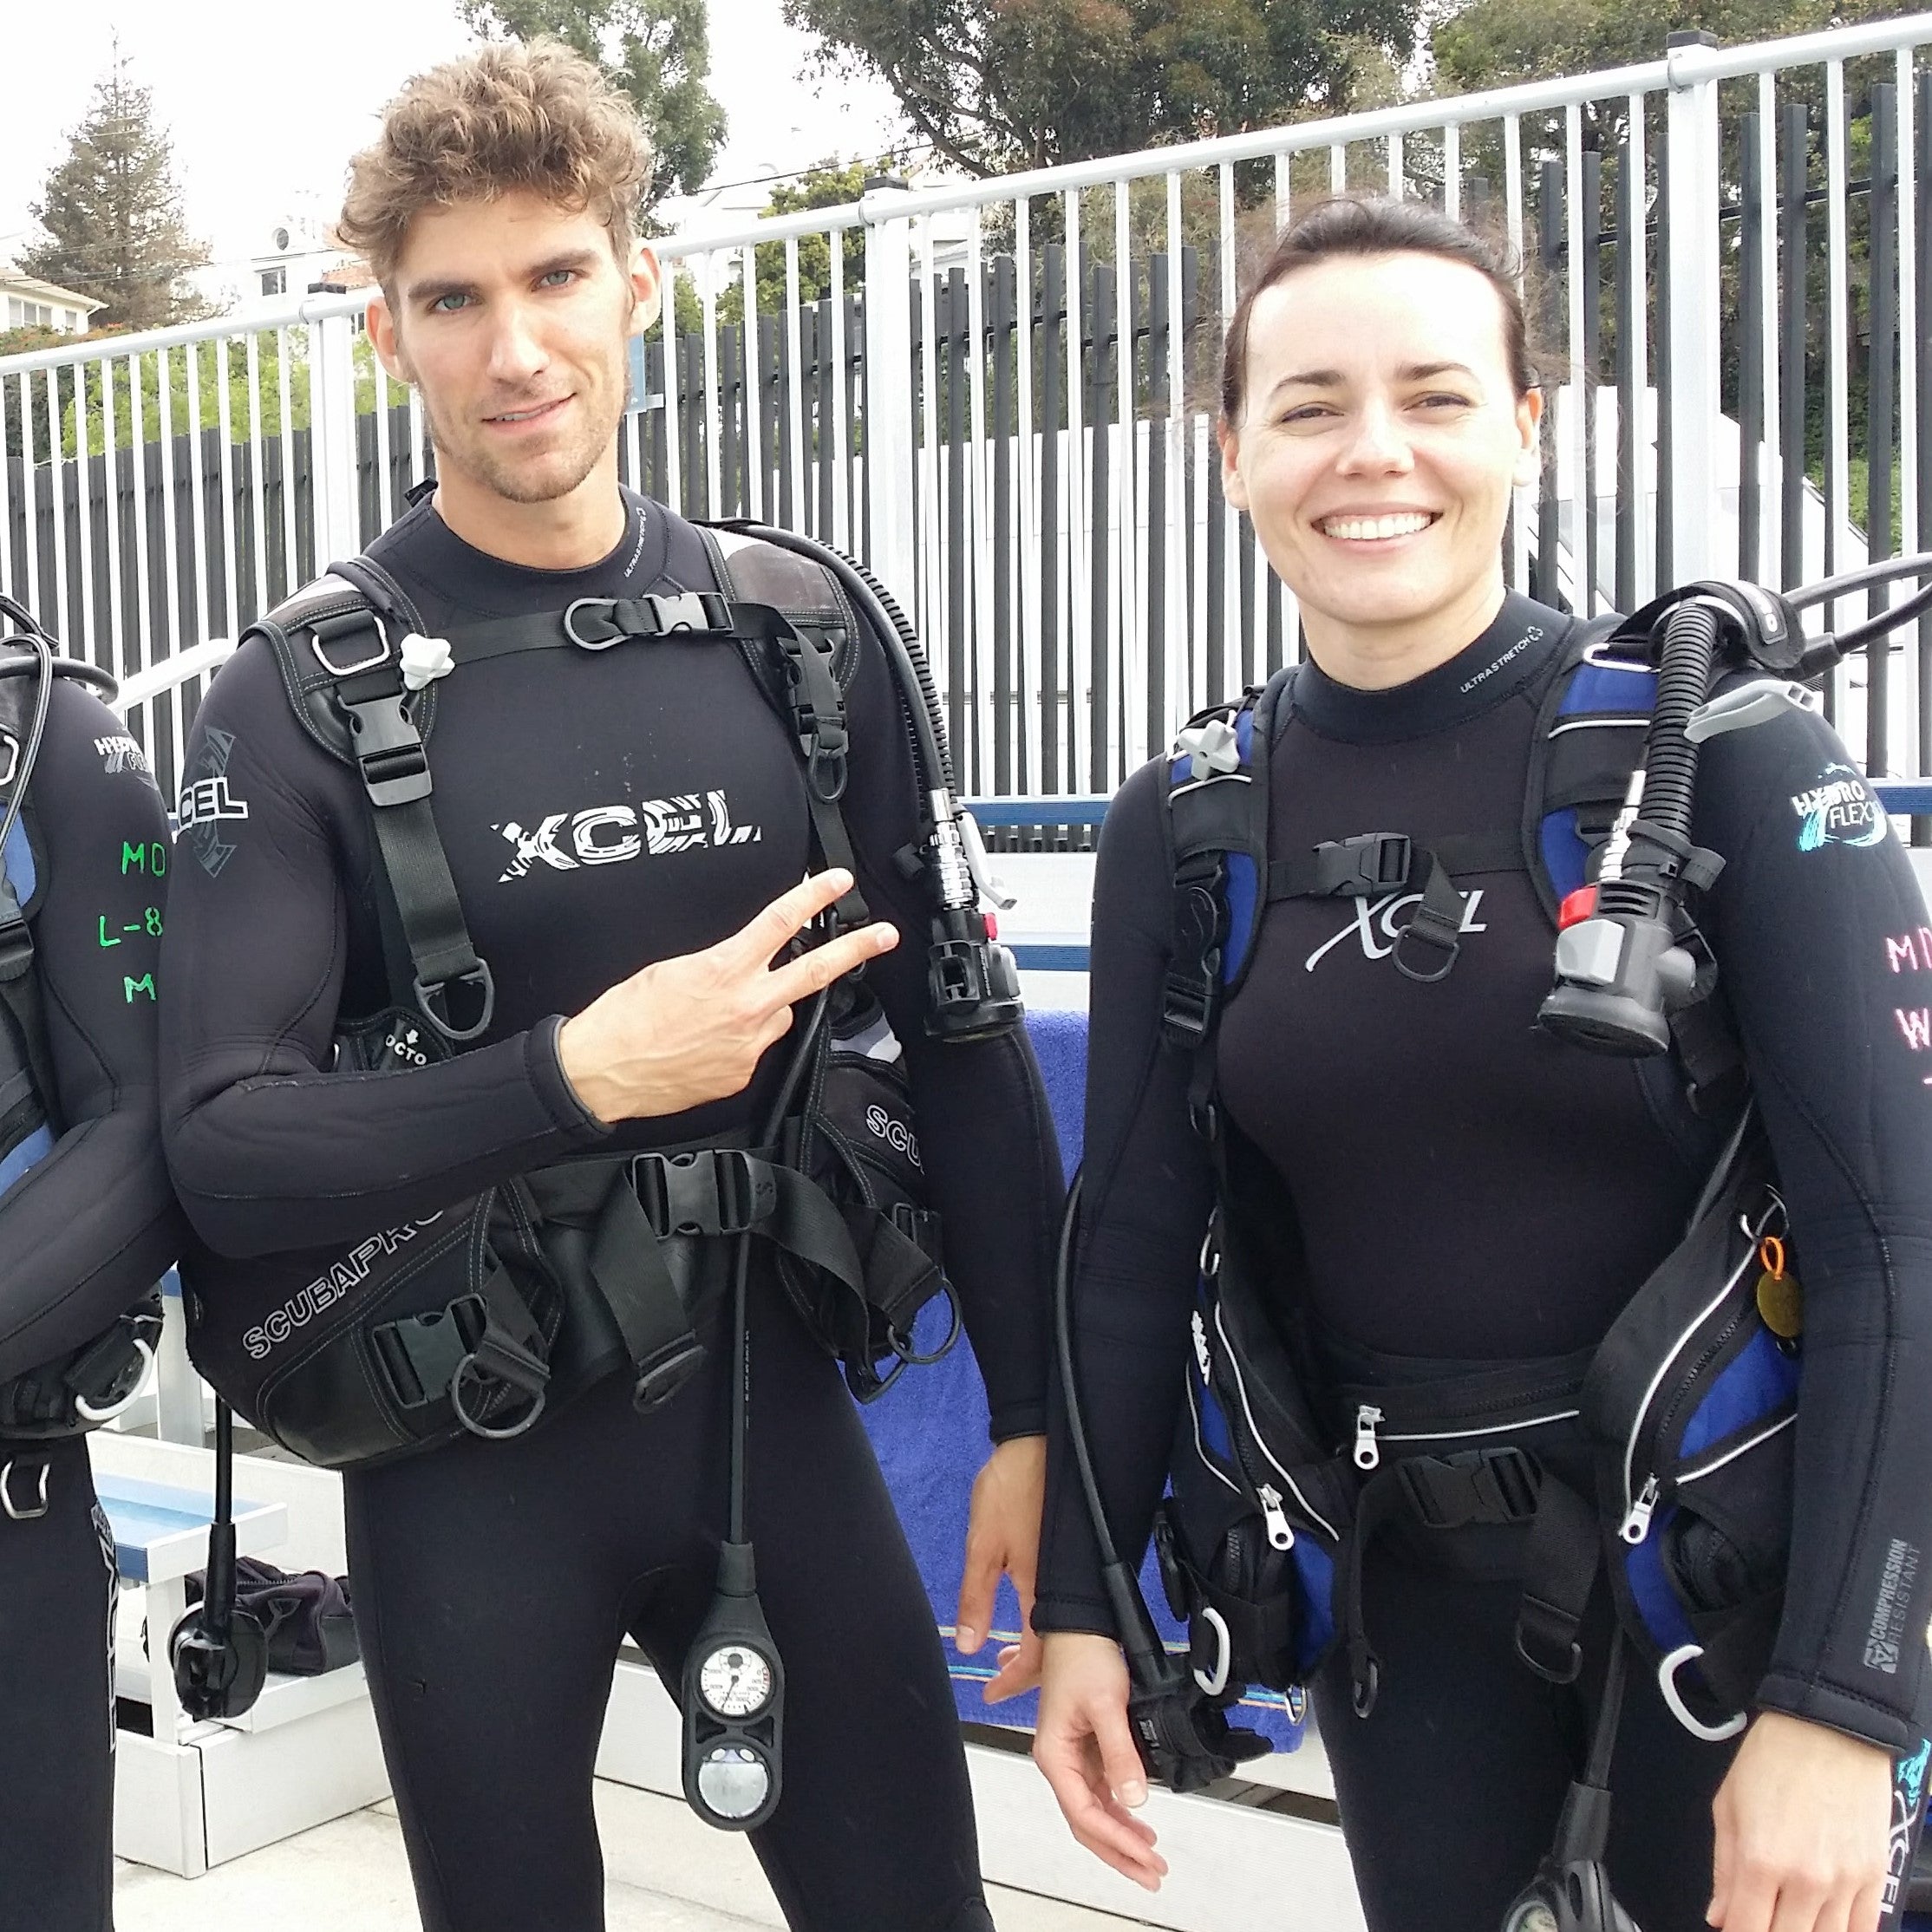 Open Water Diver Referral - Private (not incl. pool nor travel expenses)